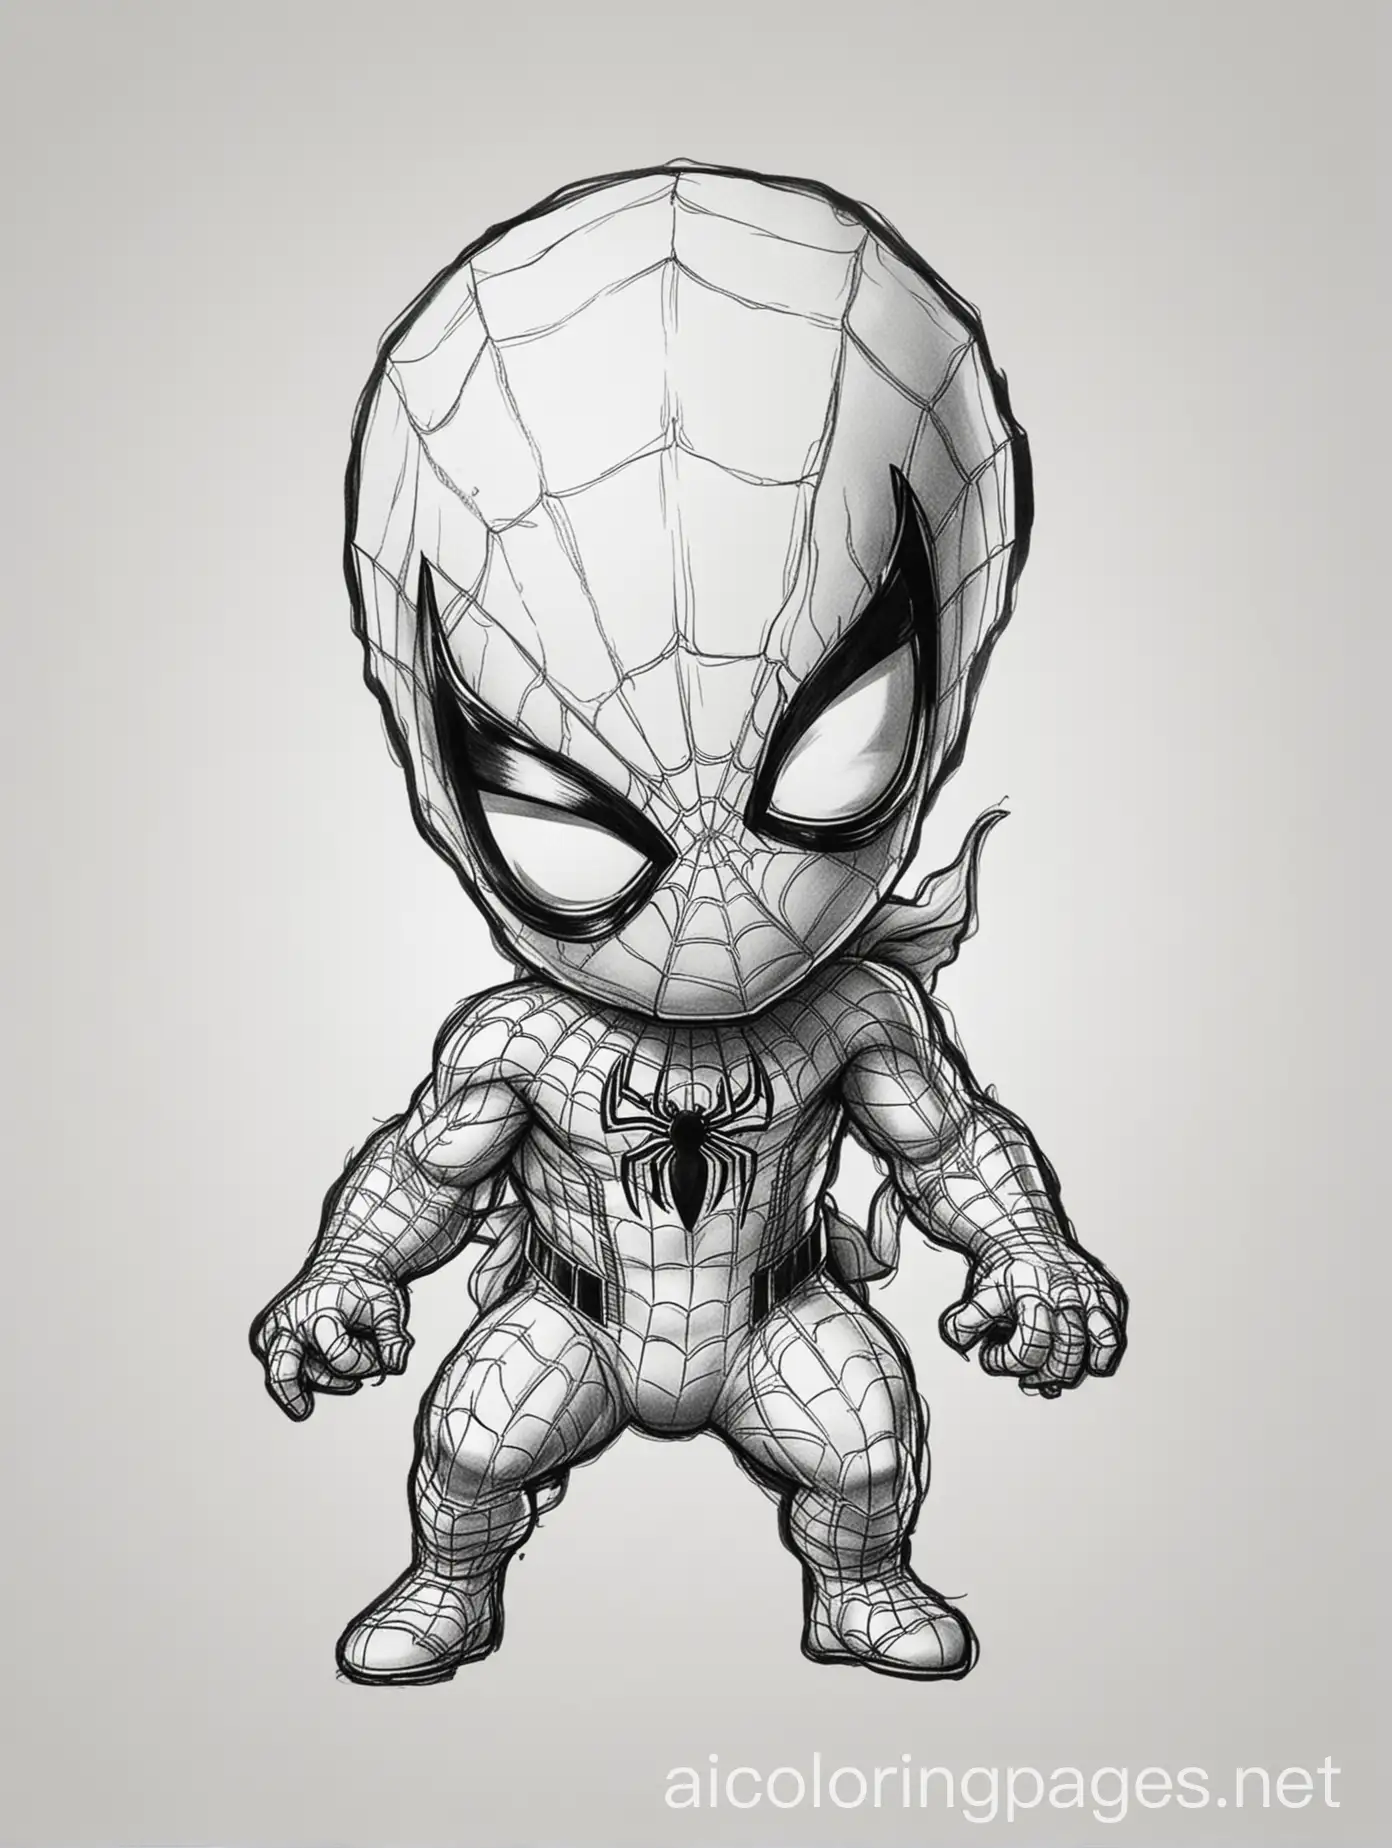 baby spider man a4 size, Coloring Page, black and white, line art, white background, Simplicity, Ample White Space. The background of the coloring page is plain white to make it easy for young children to color within the lines. The outlines of all the subjects are easy to distinguish, making it simple for kids to color without too much difficulty